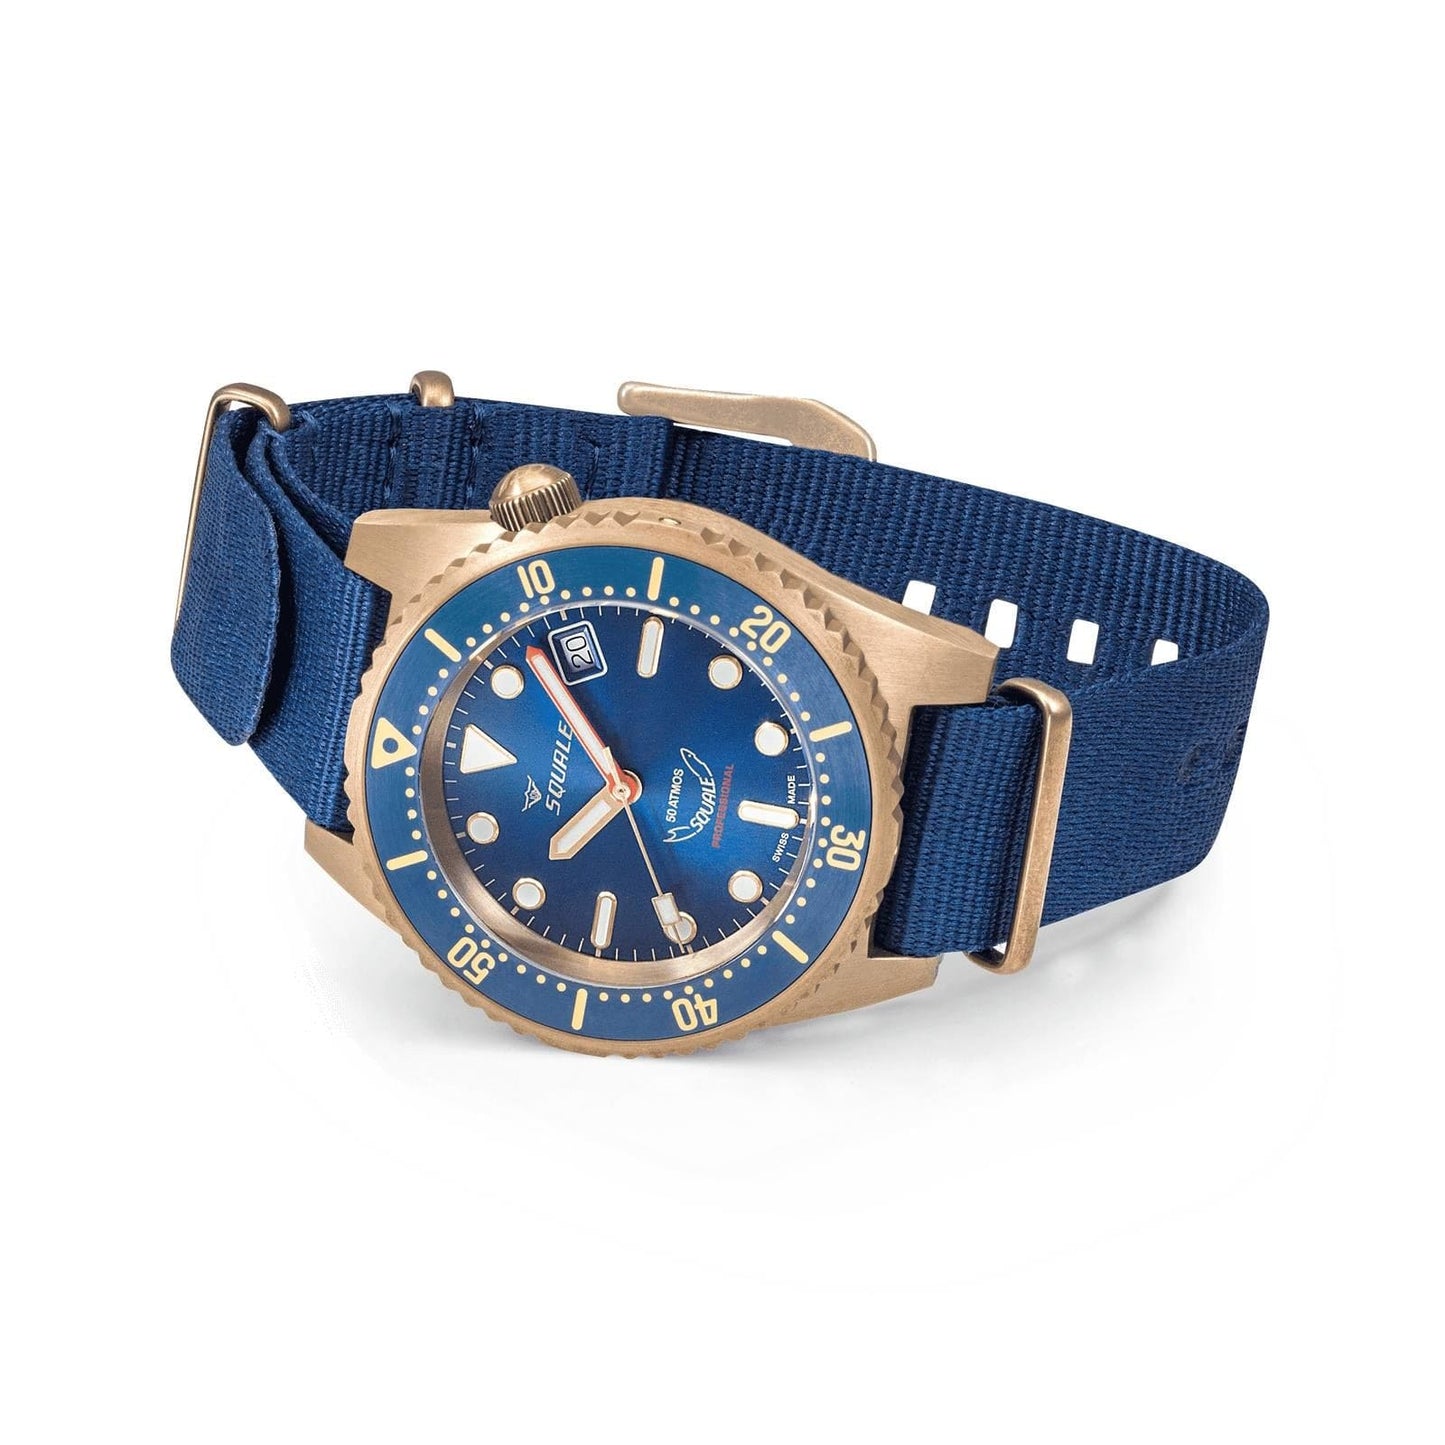 Squale 1521 Bronze Divers Watch